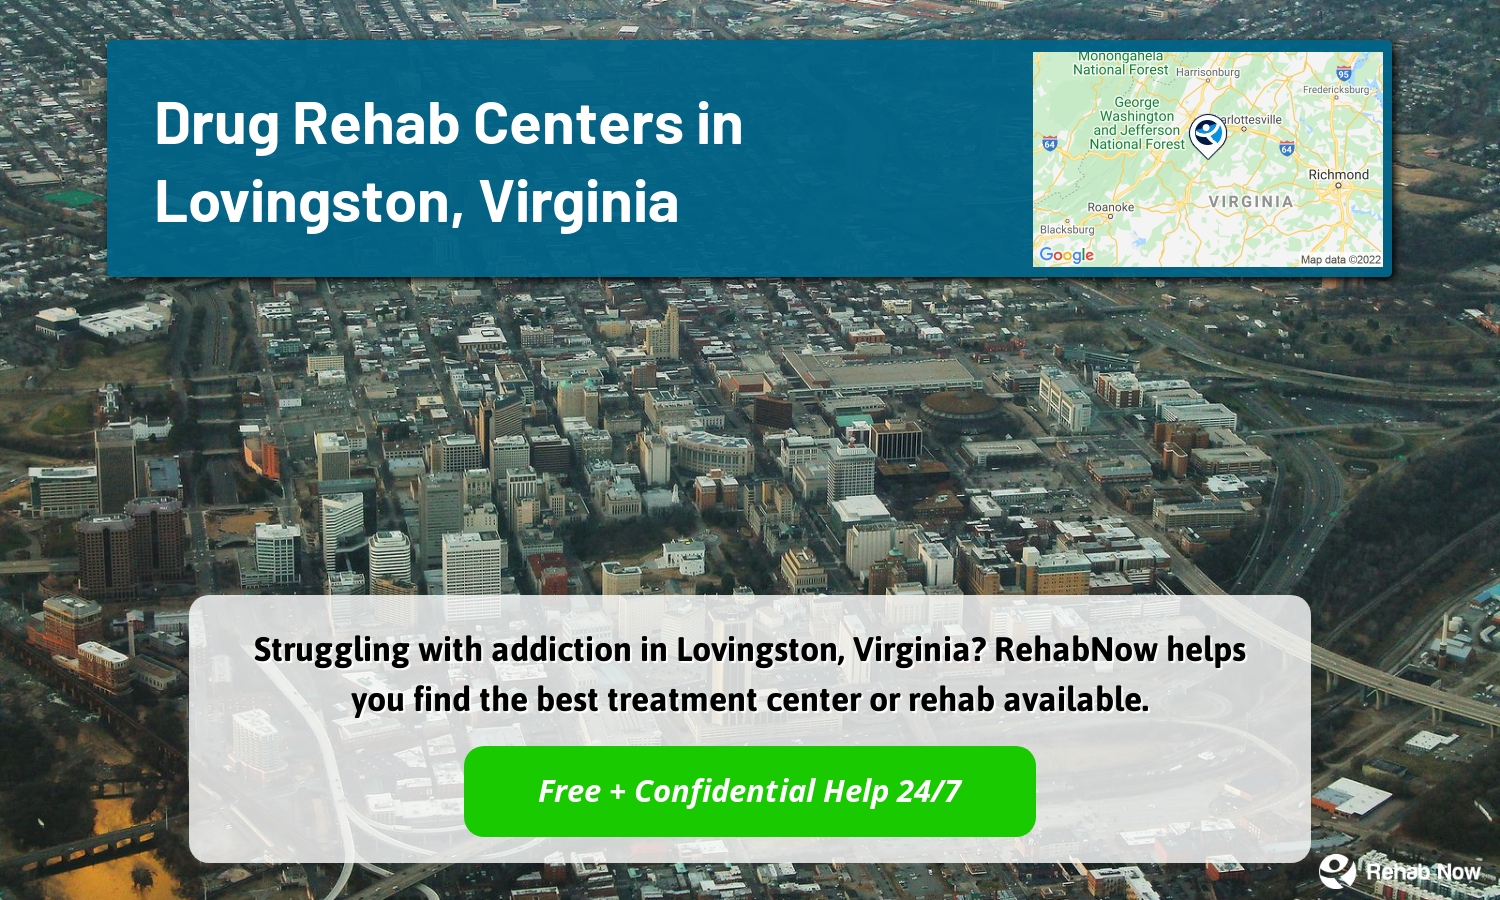 Struggling with addiction in Lovingston, Virginia? RehabNow helps you find the best treatment center or rehab available.